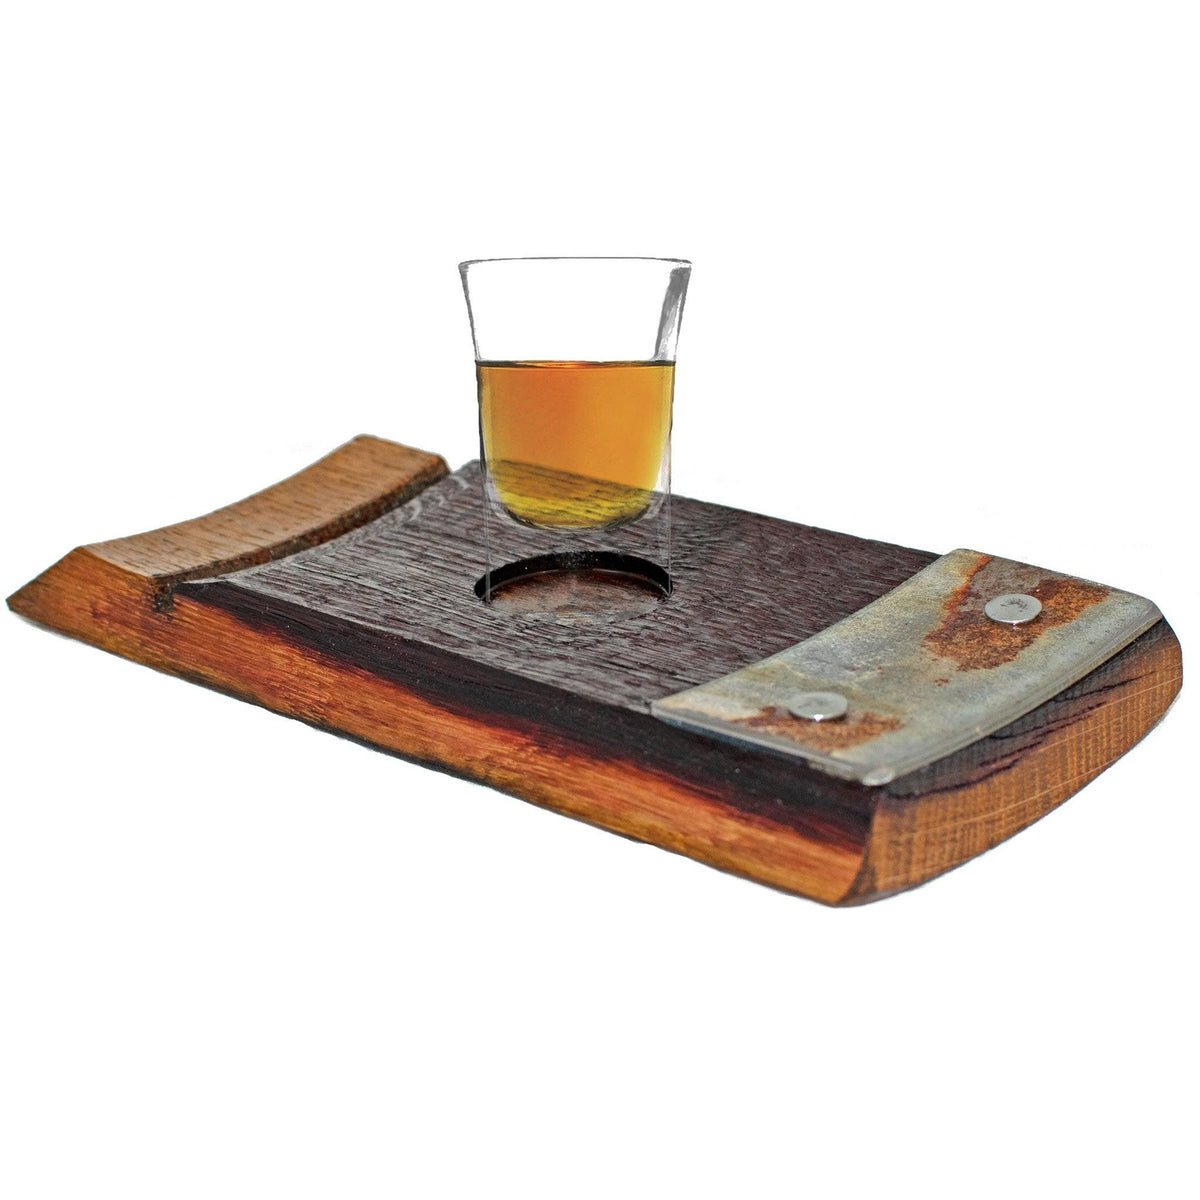 Lee Display's Wine Barrel Stave Single Shot Glass Holder with a glass of bourbon on it